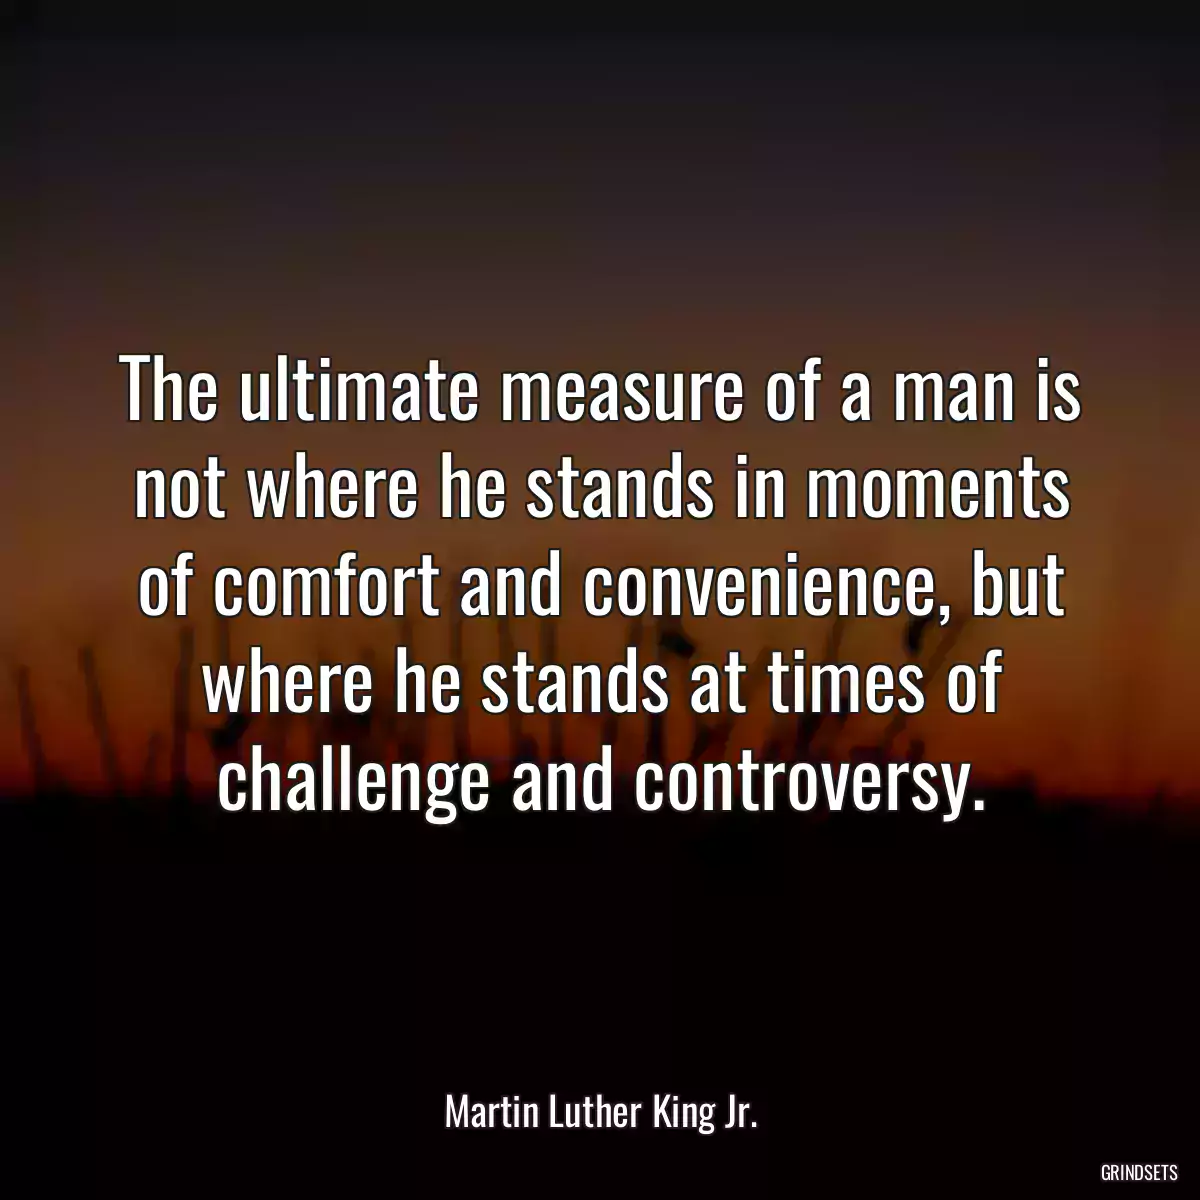 The ultimate measure of a man is not where he stands in moments of comfort and convenience, but where he stands at times of challenge and controversy.